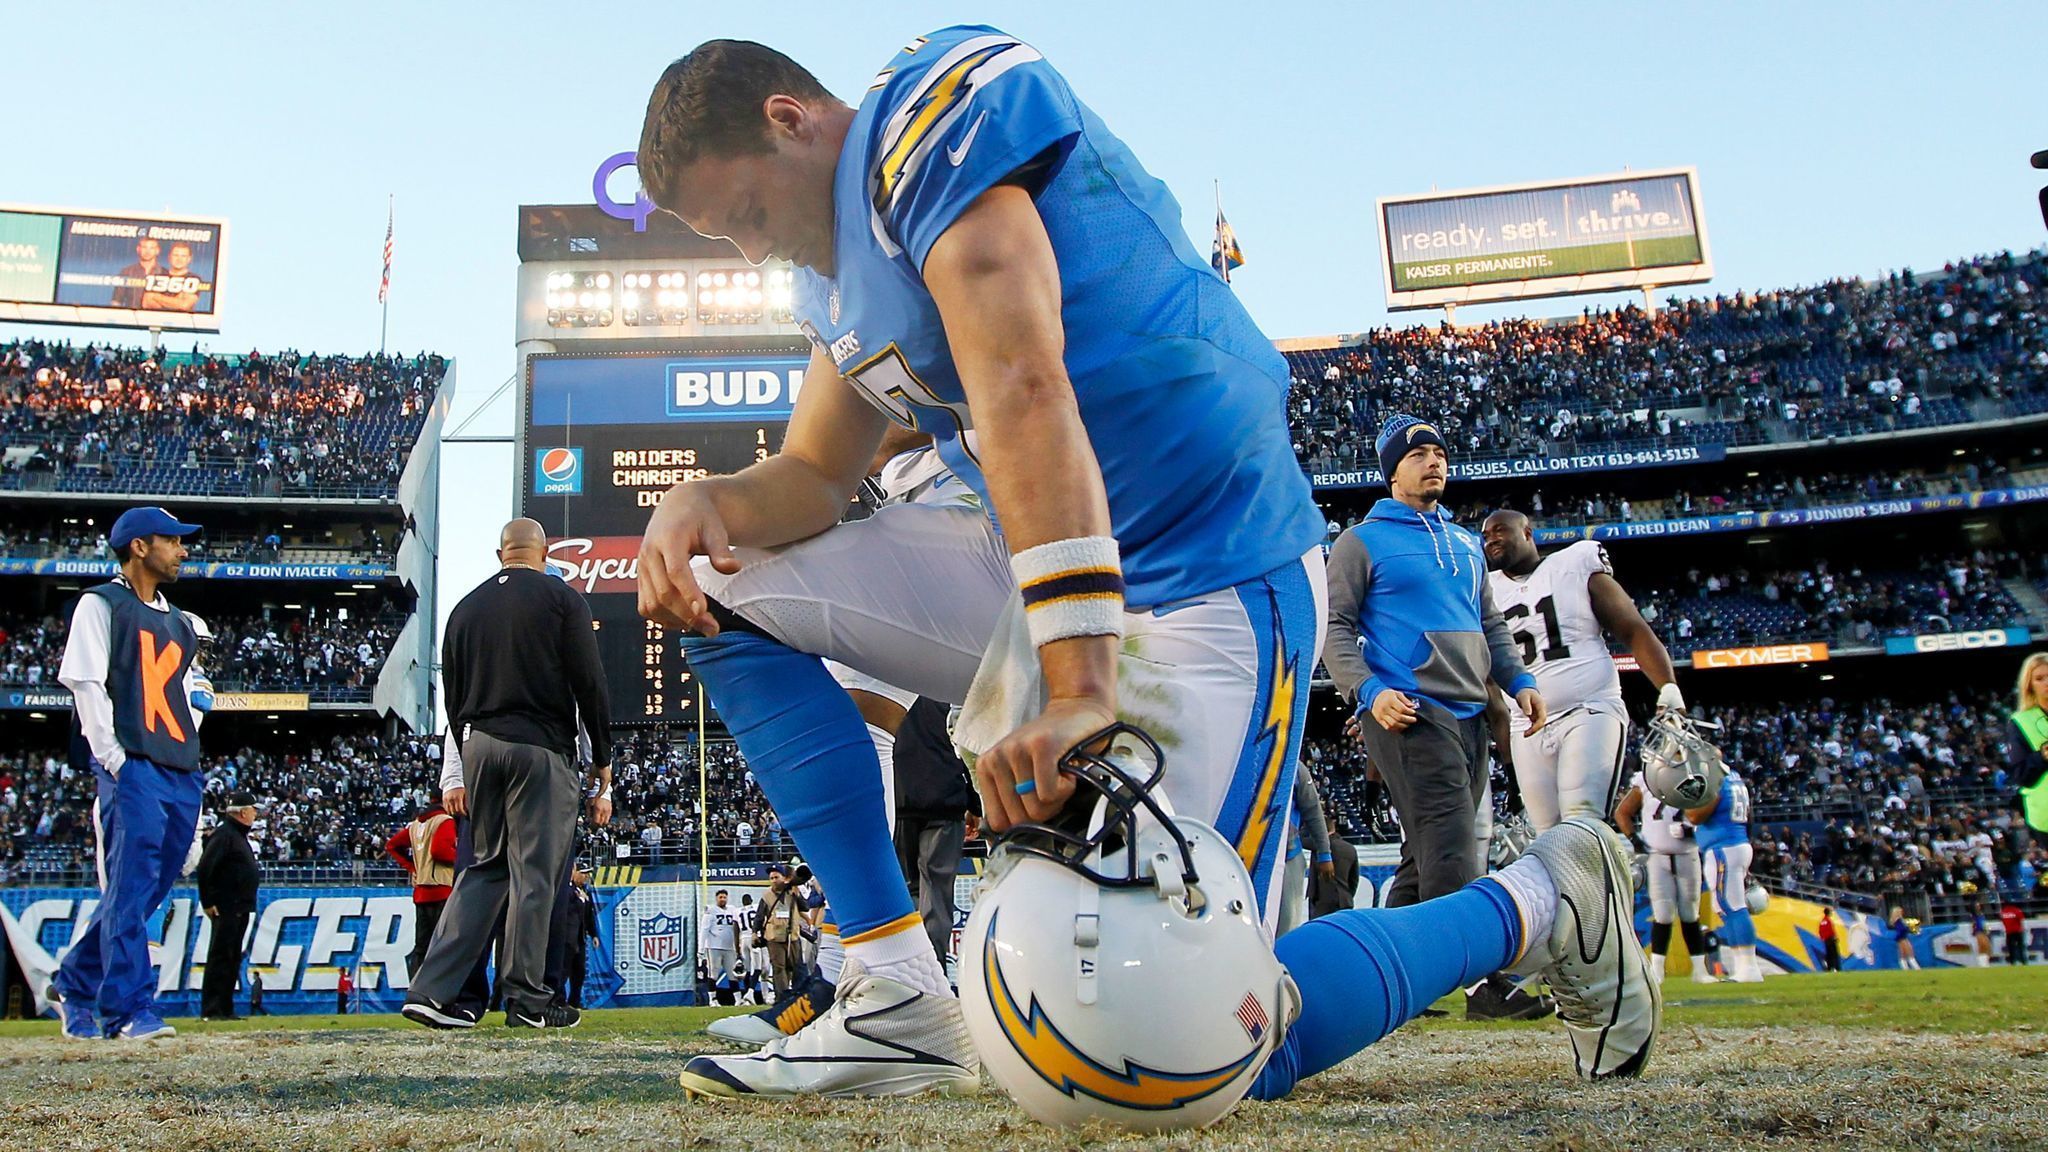 Philip Rivers laments San Diego situation after 'home' loss - The San Diego Union-Tribune2048 x 1152